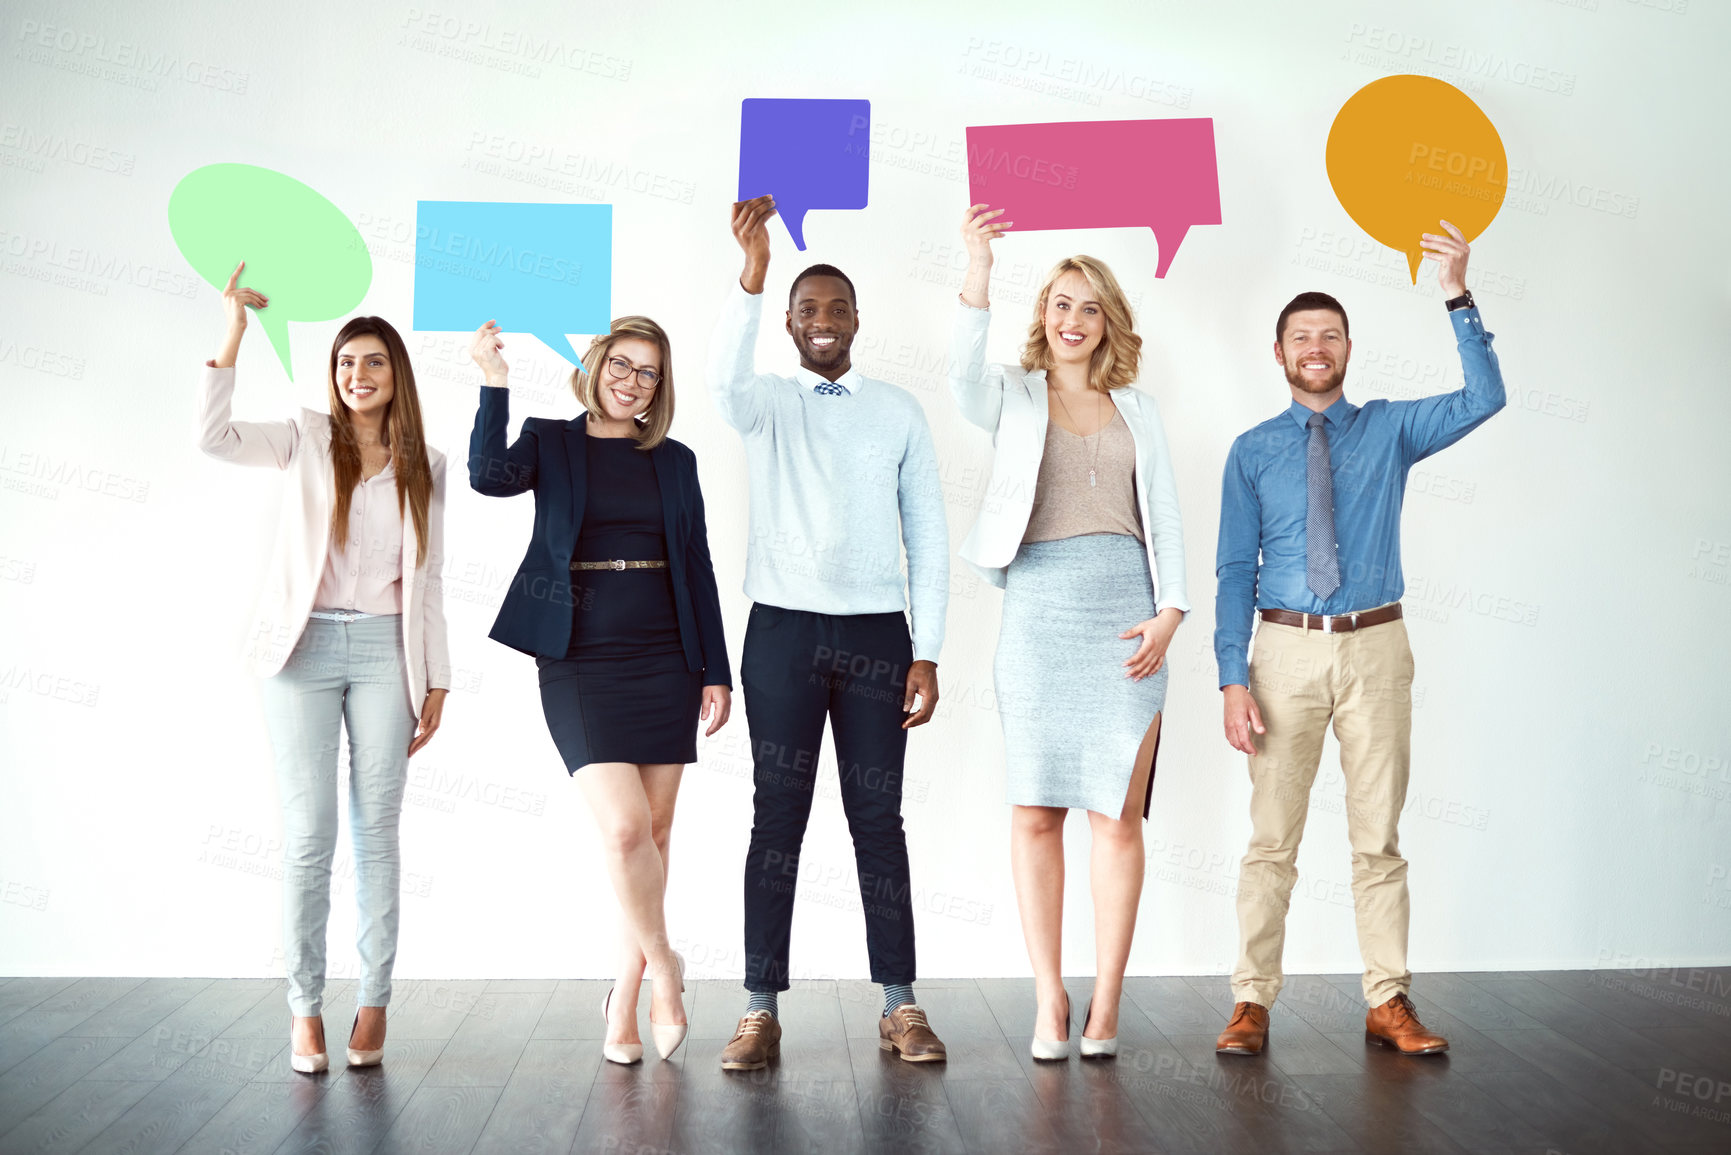 Buy stock photo Shot of a group of work colleagues standing next to each other while holding speech bubbles against a white background